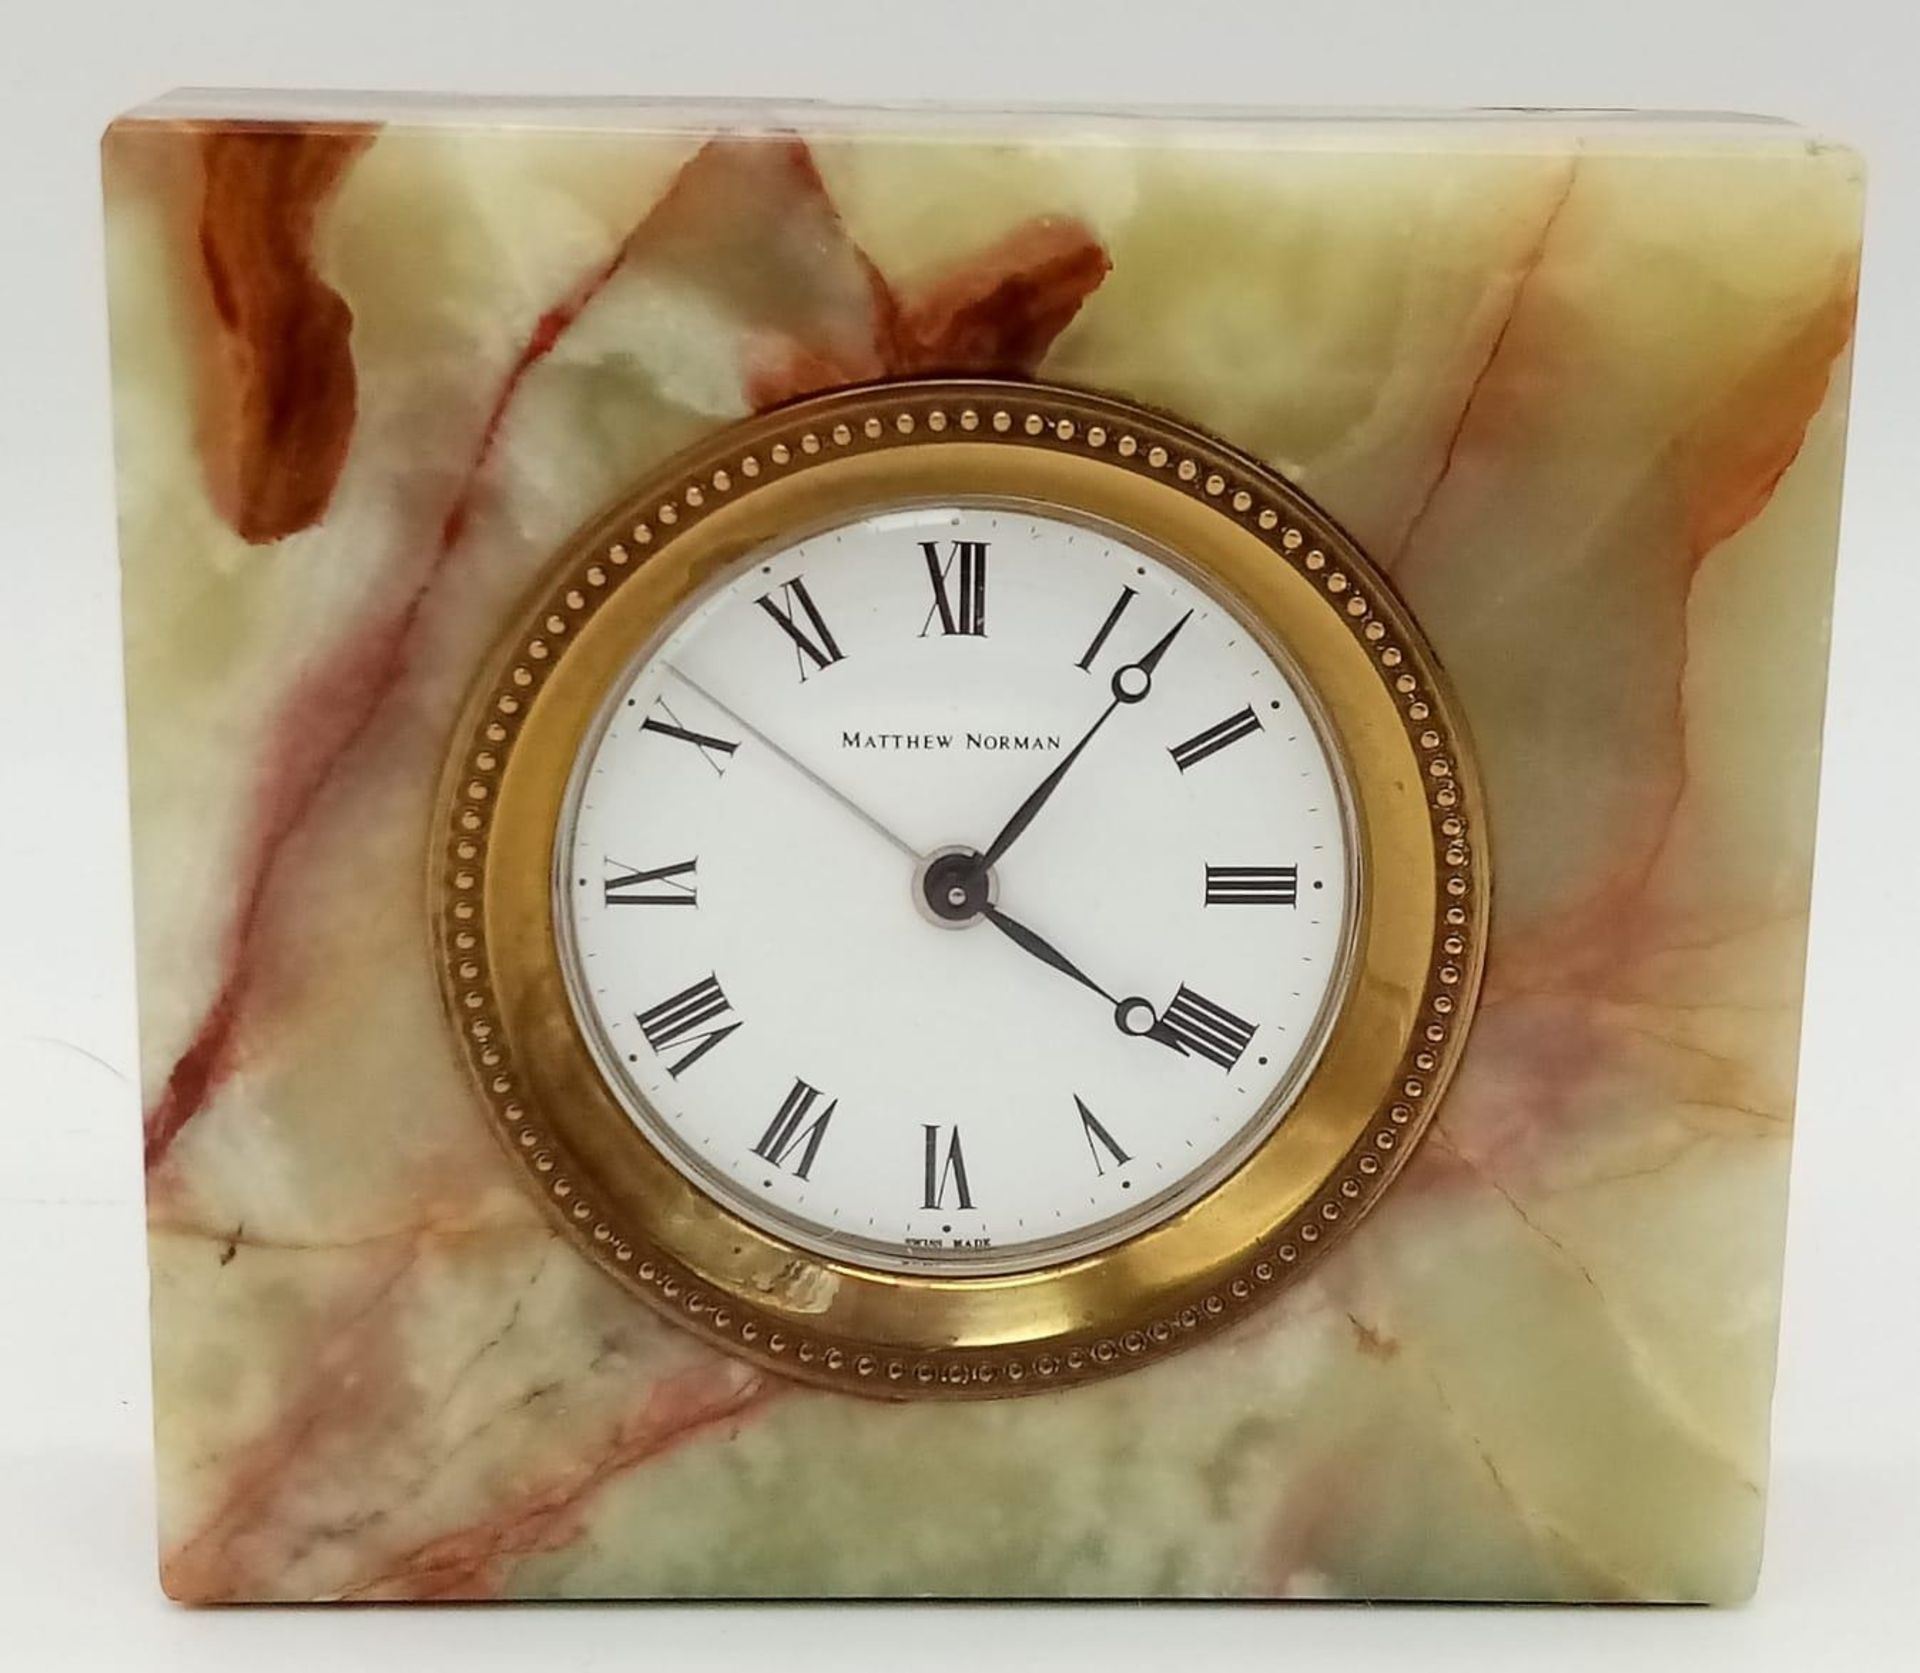 A Vintage Matthew Norman Onyx Desk Clock. Mechanical movement in good condition and working order.